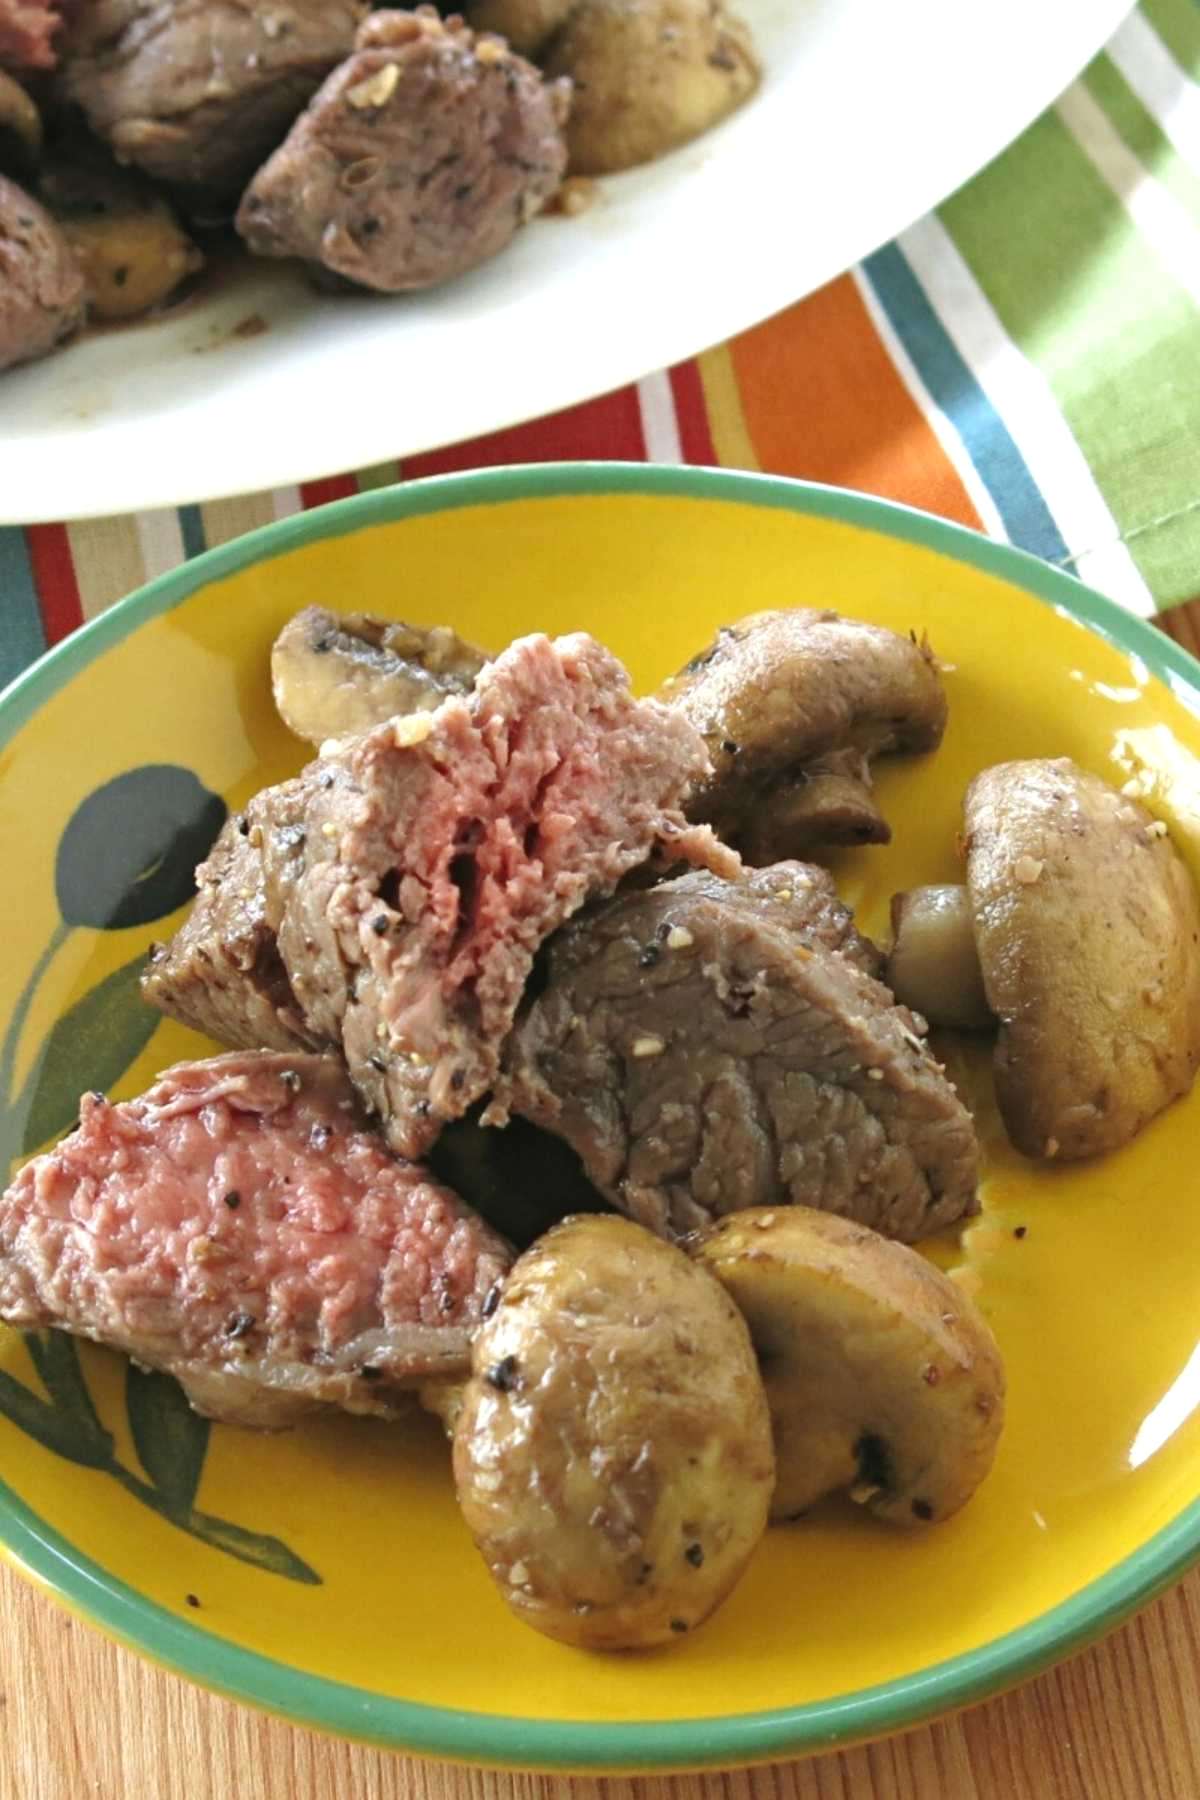 Steak bites and mushrooms made in an air fryer on a plate.